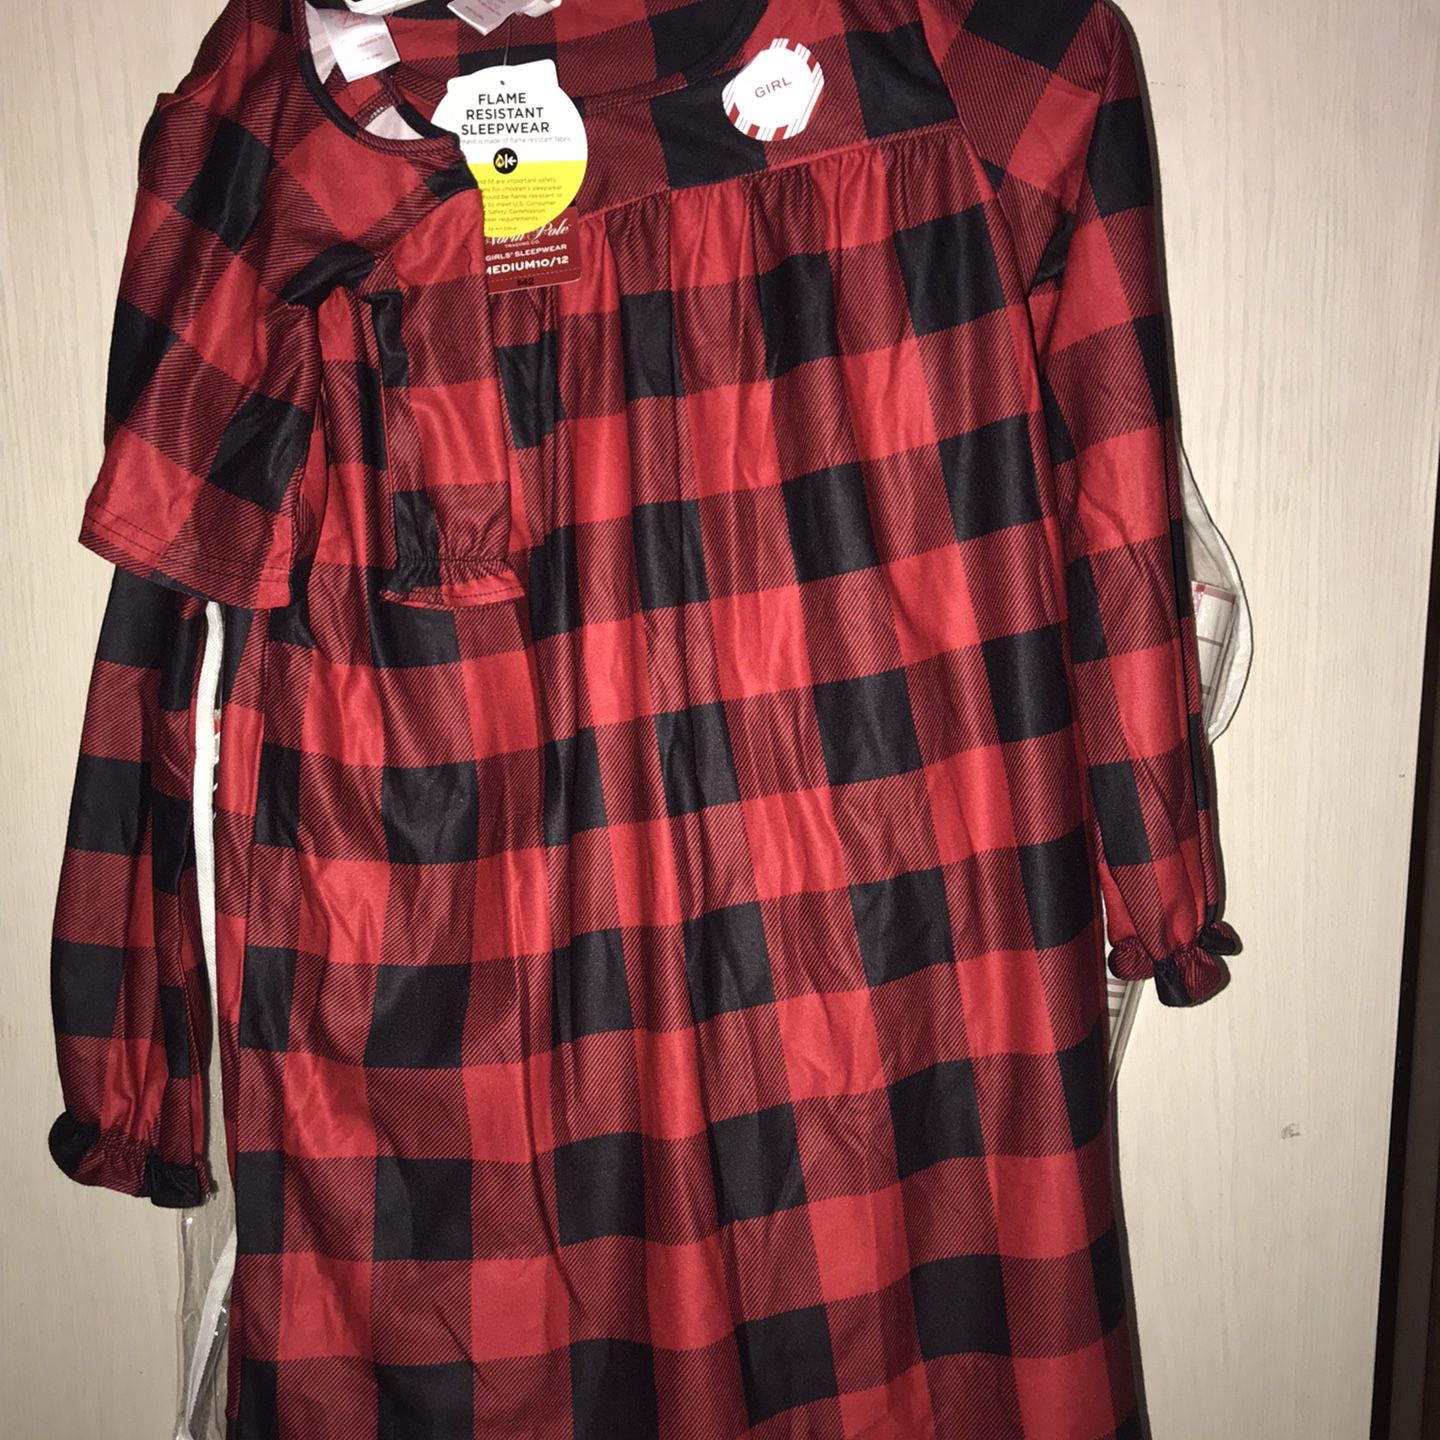 $6 NWT Nightgown + Matching Doll Nightgown Size 10/12